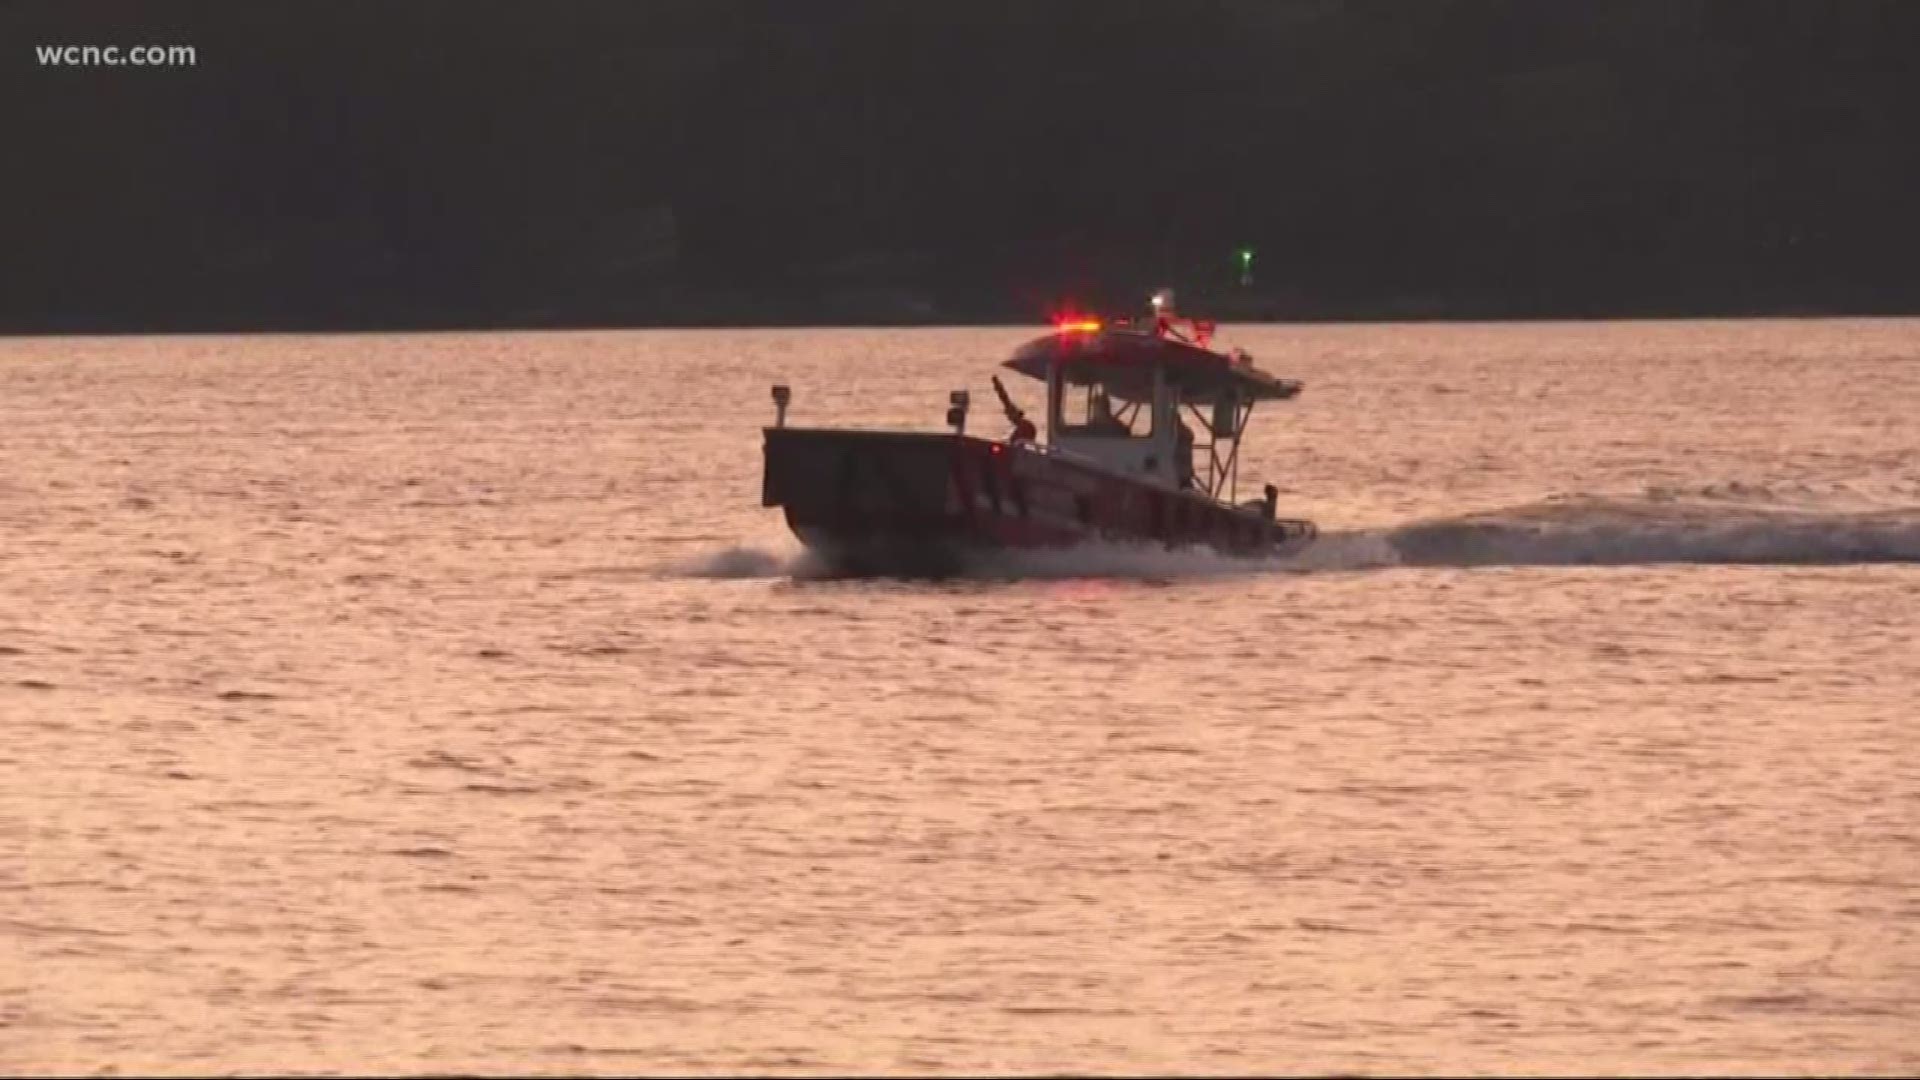 Officials say the 22-year-old man was wearing a life jacket, but it likely wasn't secured properly and slipped off.